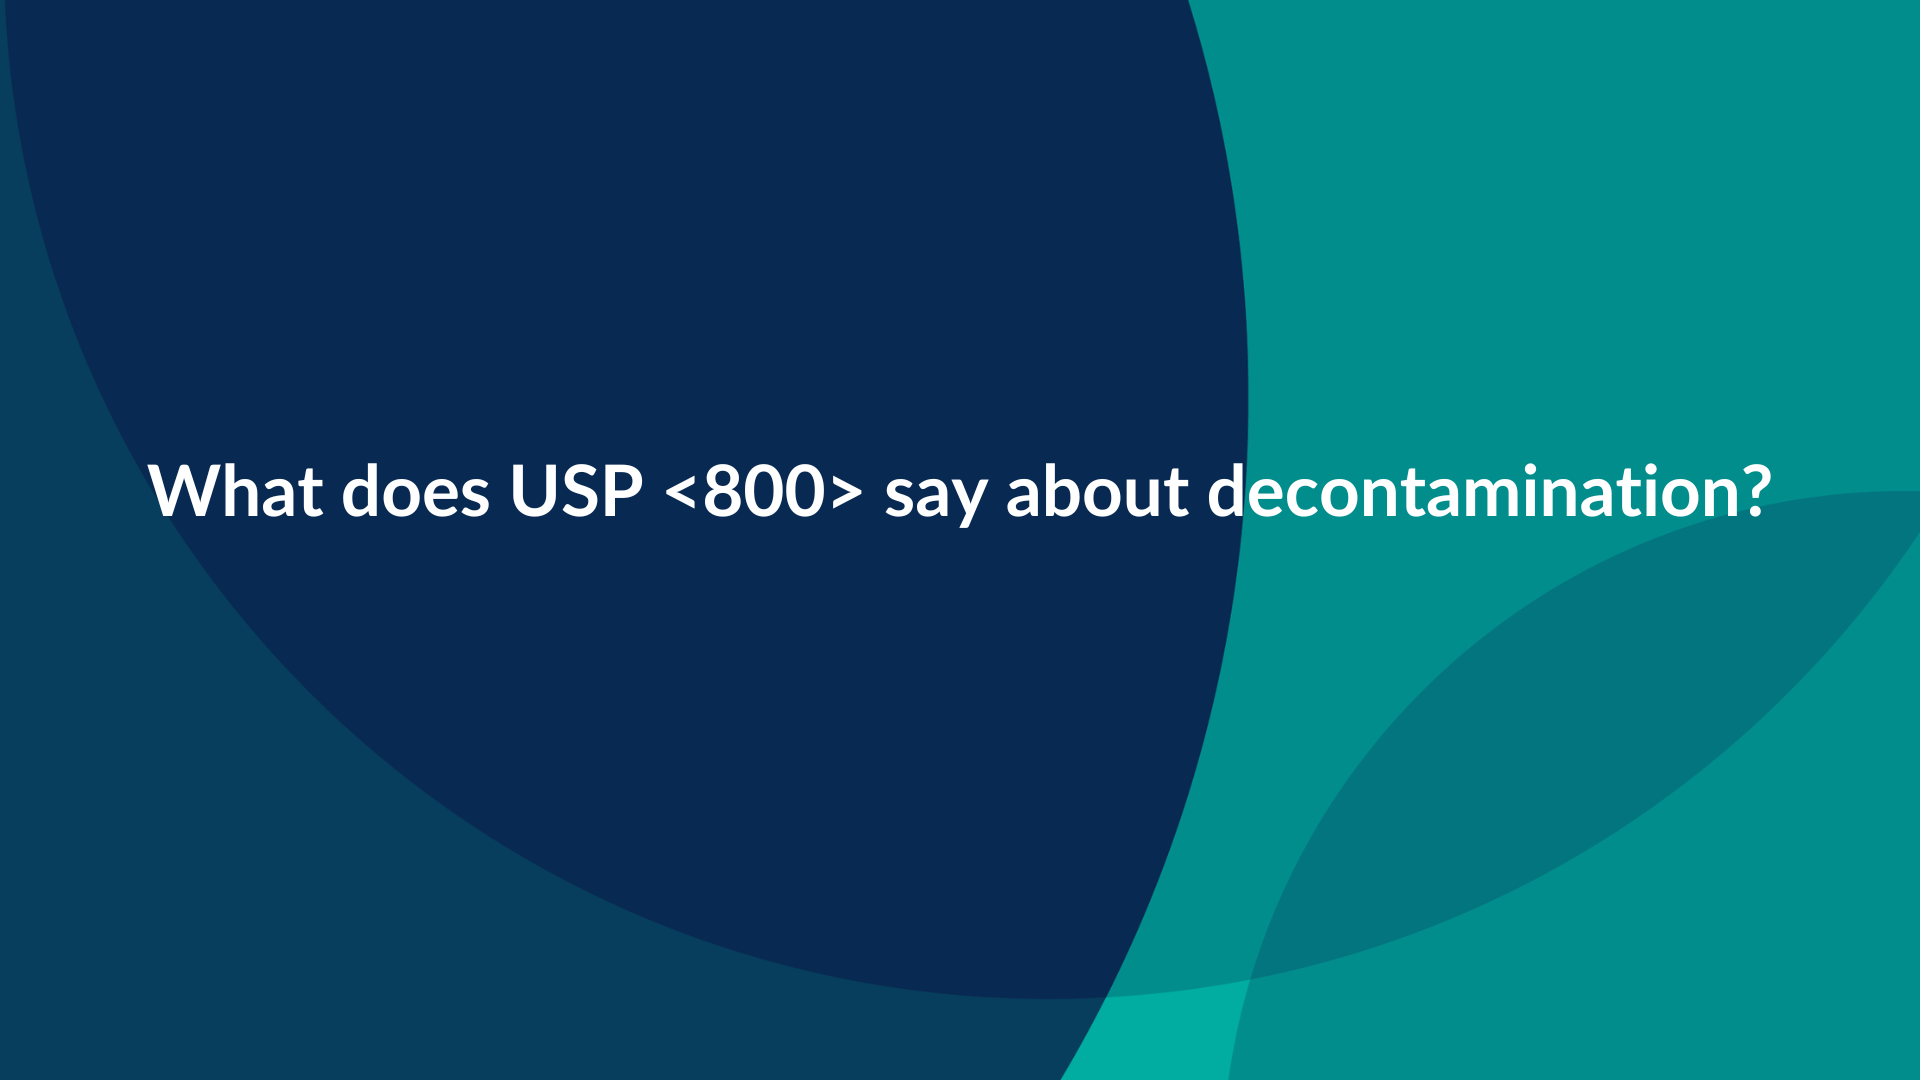 Image of What does USP <800> say about decontamination?